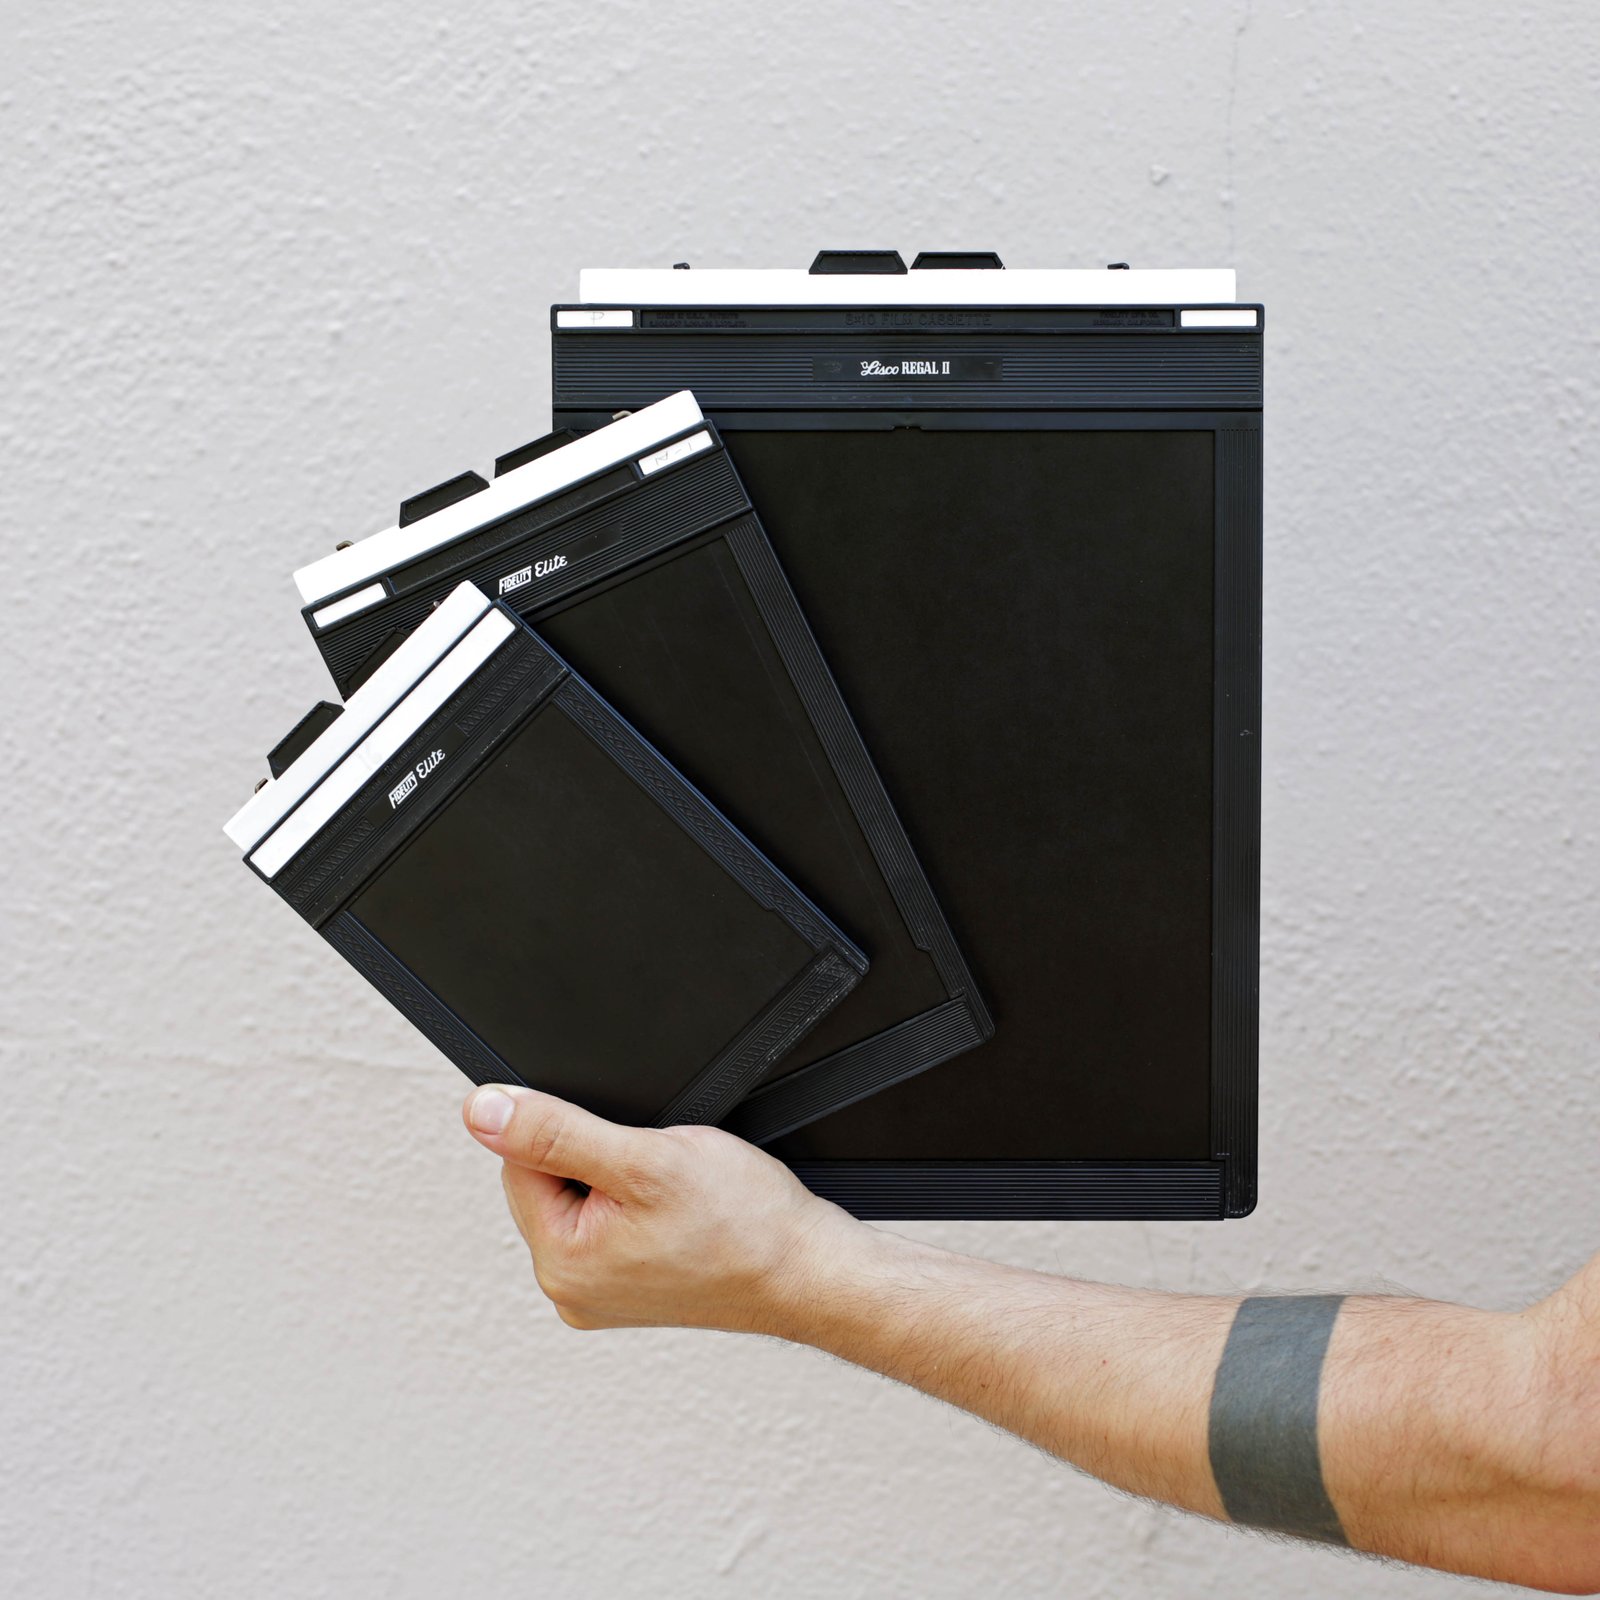 Sheet Film Holders for Large Format Cameras (5X7, 8X10) | CatLABS